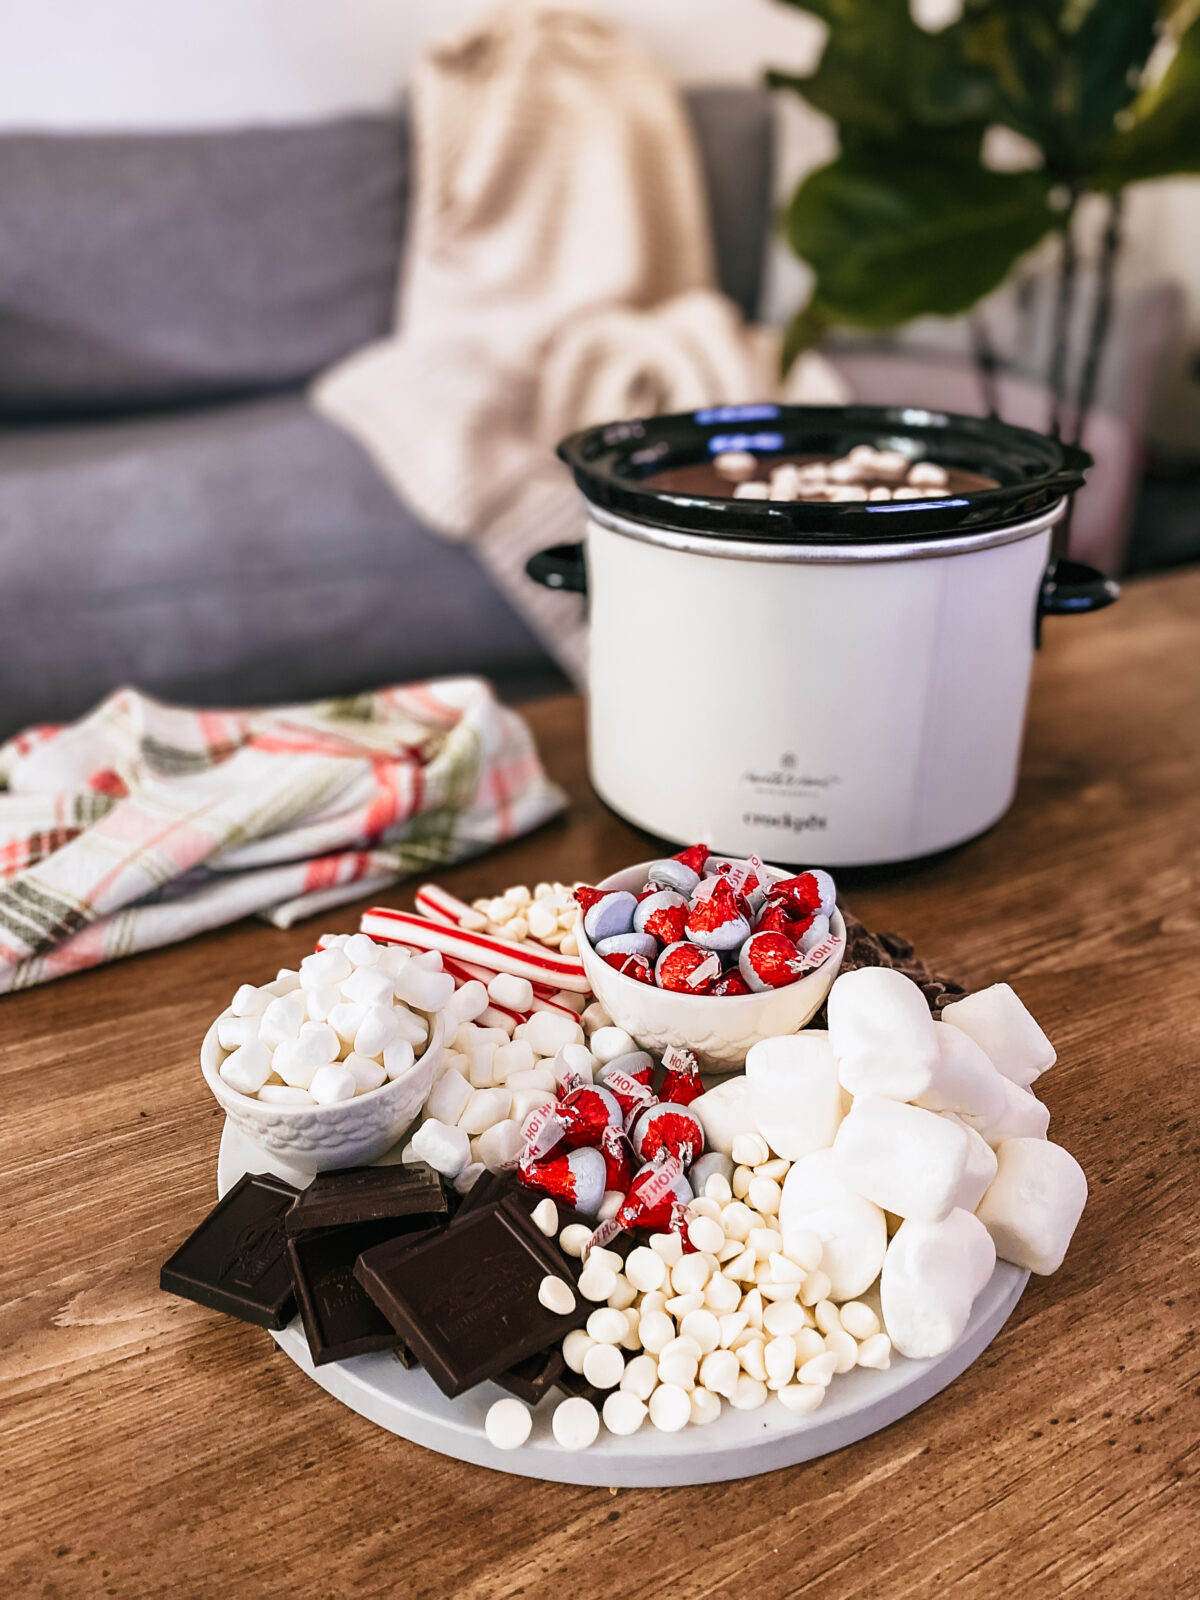 A hot cocoa charcuterie board with marshmallows, hershey kisses, chocolate chips, and peppermint sticks on a table with a crockpot filled with hot chocolate.